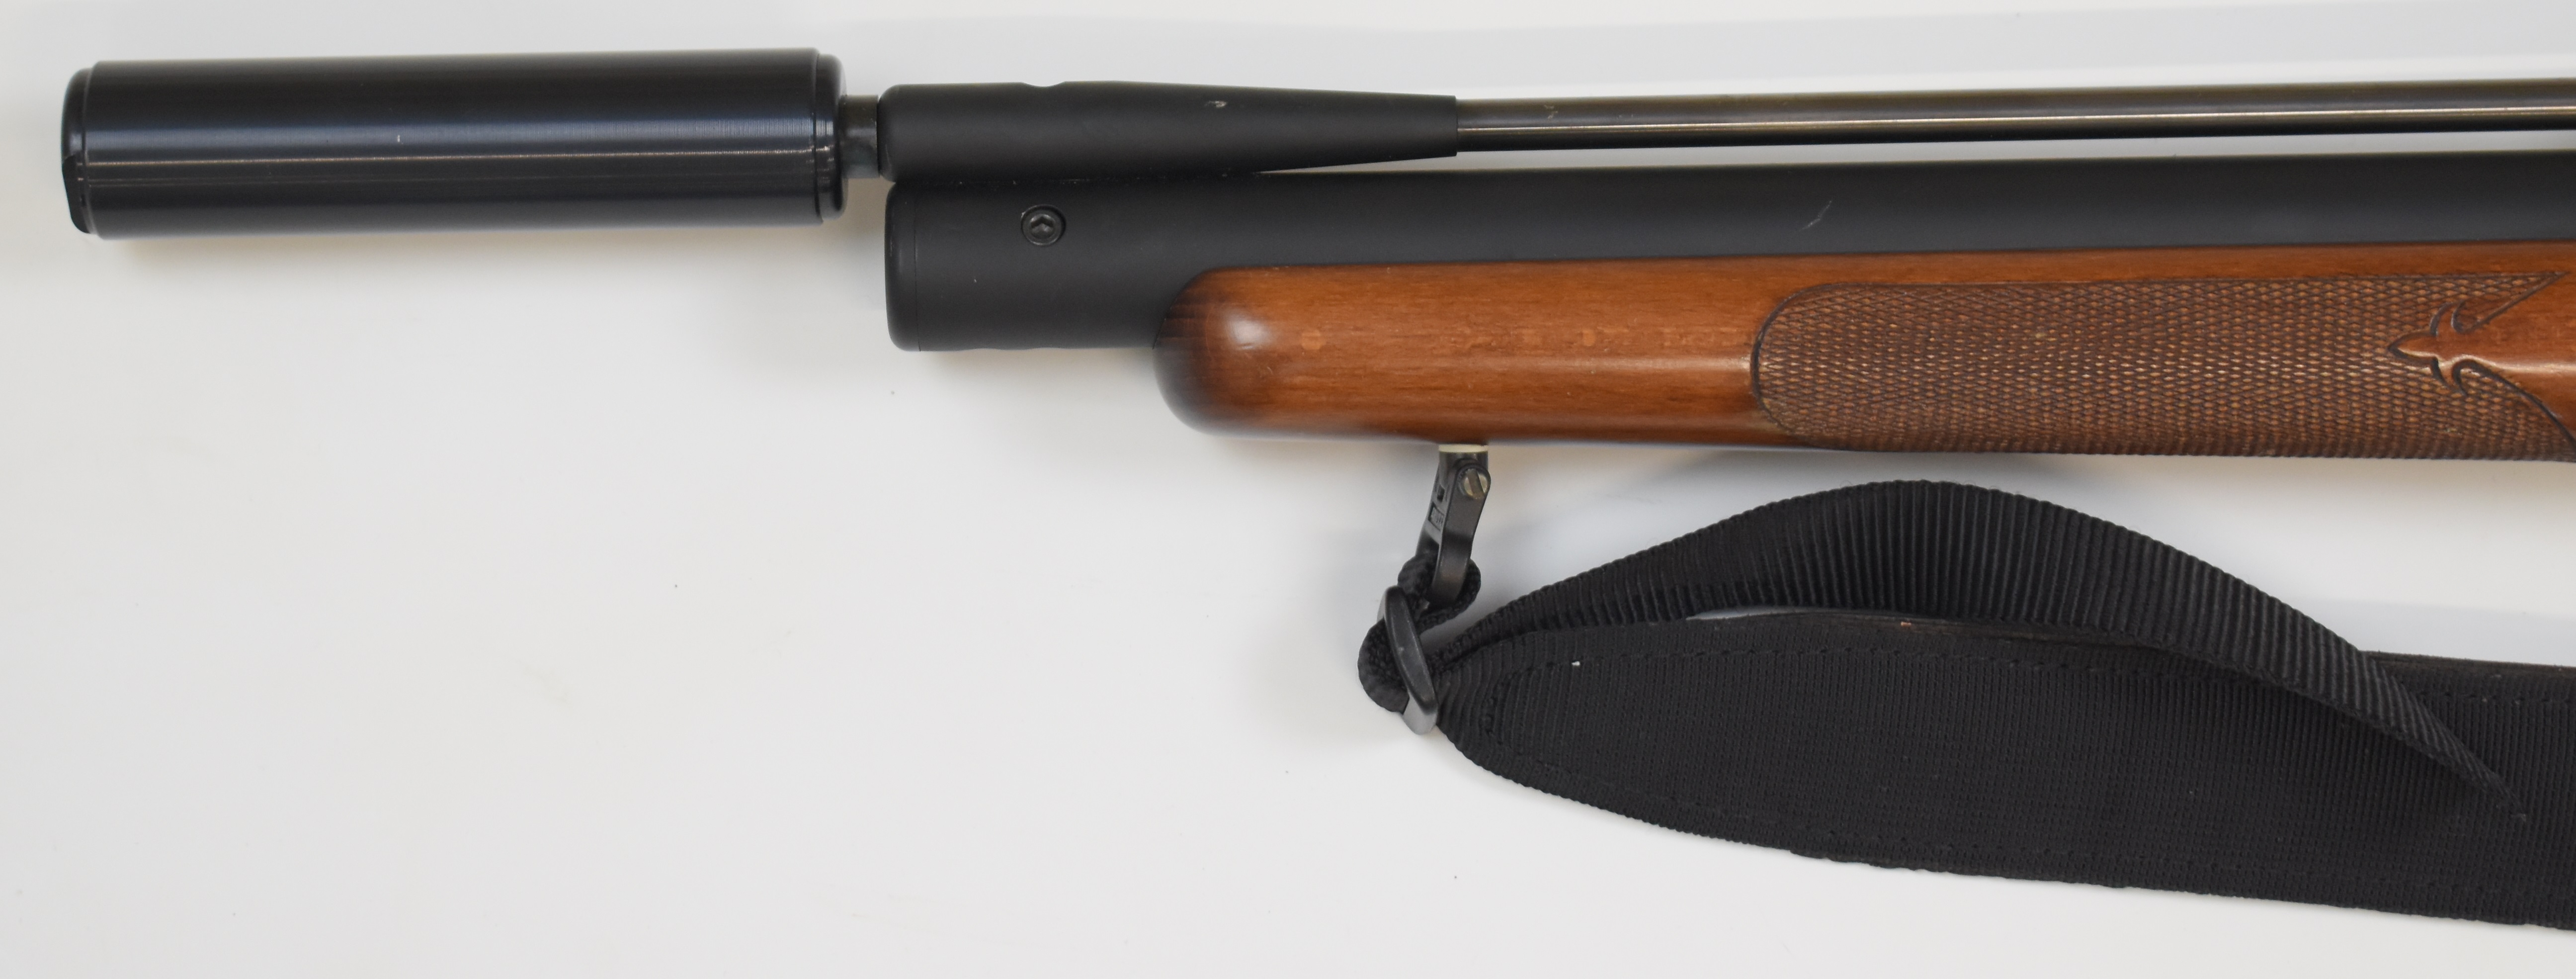 Webley Axsor .22 PCP air rifle with chequered semi-pistol grip and forend, raised cheek piece, - Image 19 of 20